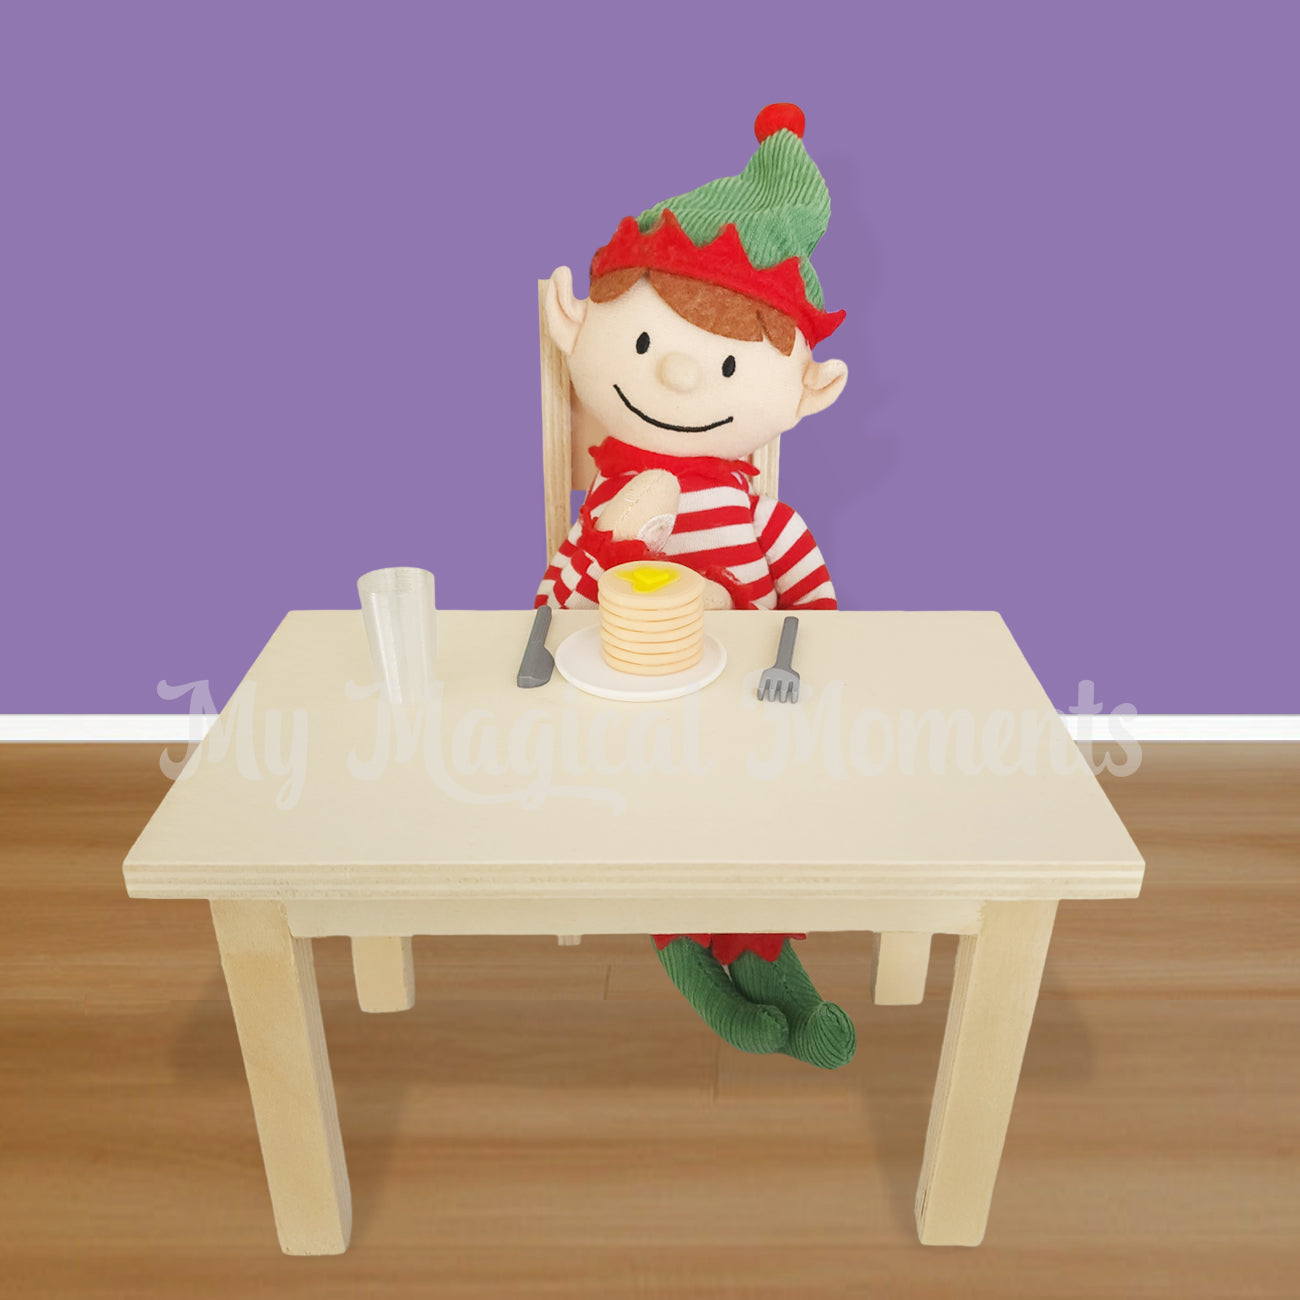 Elf for Christmas eating pancake prop at table and chair set